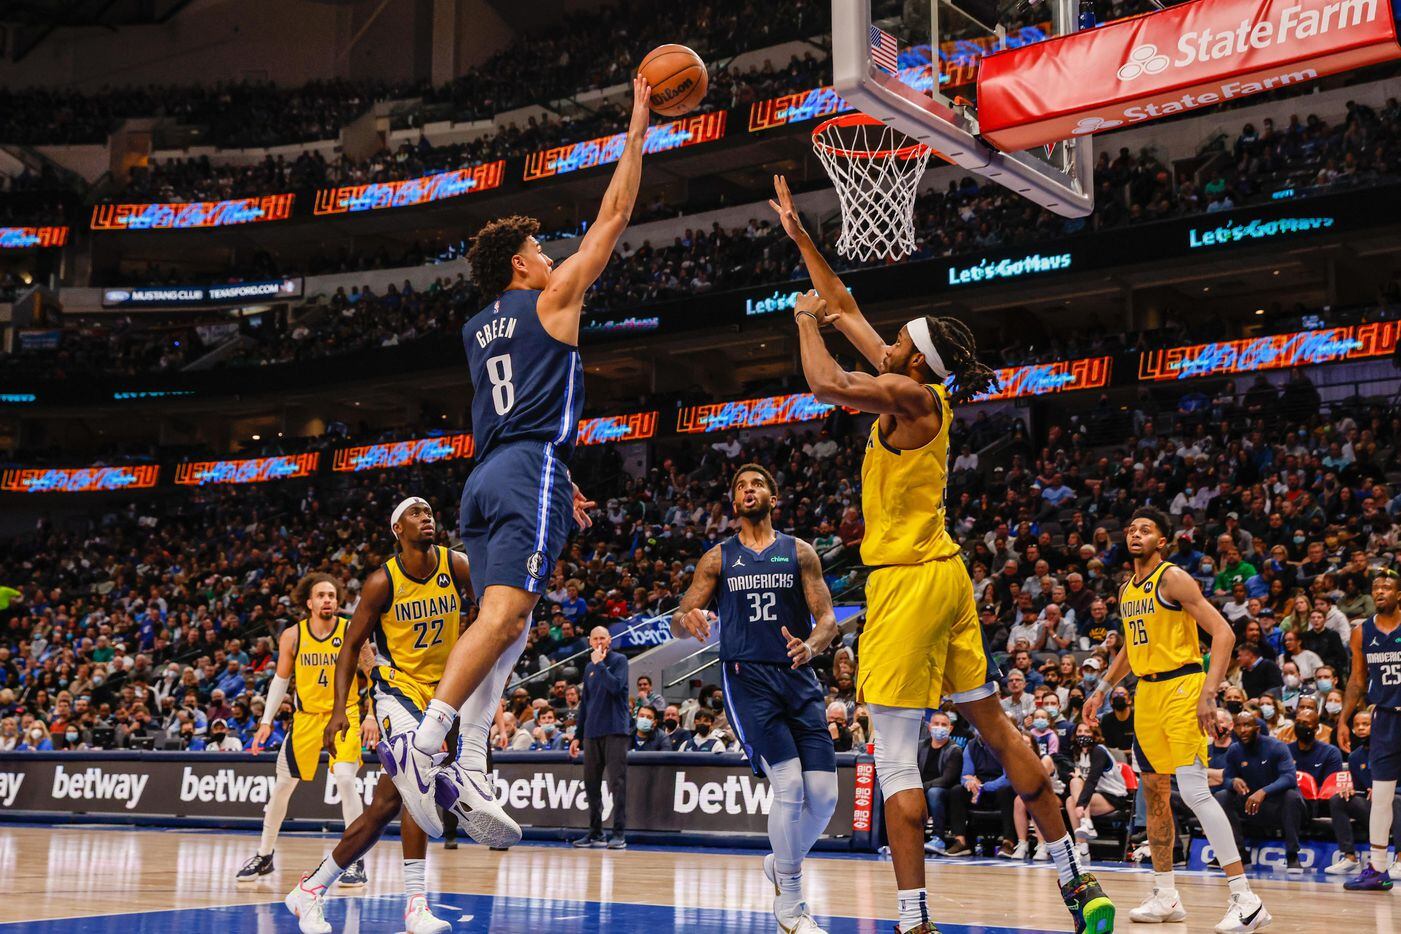 Dallas Mavericks forward George King (8) goes for a shot as Indiana Pacers forward Isaiah Jackson (23) tries to block him during the second half at the American Airlines Center in Dallas on Saturday, January 29, 2022.